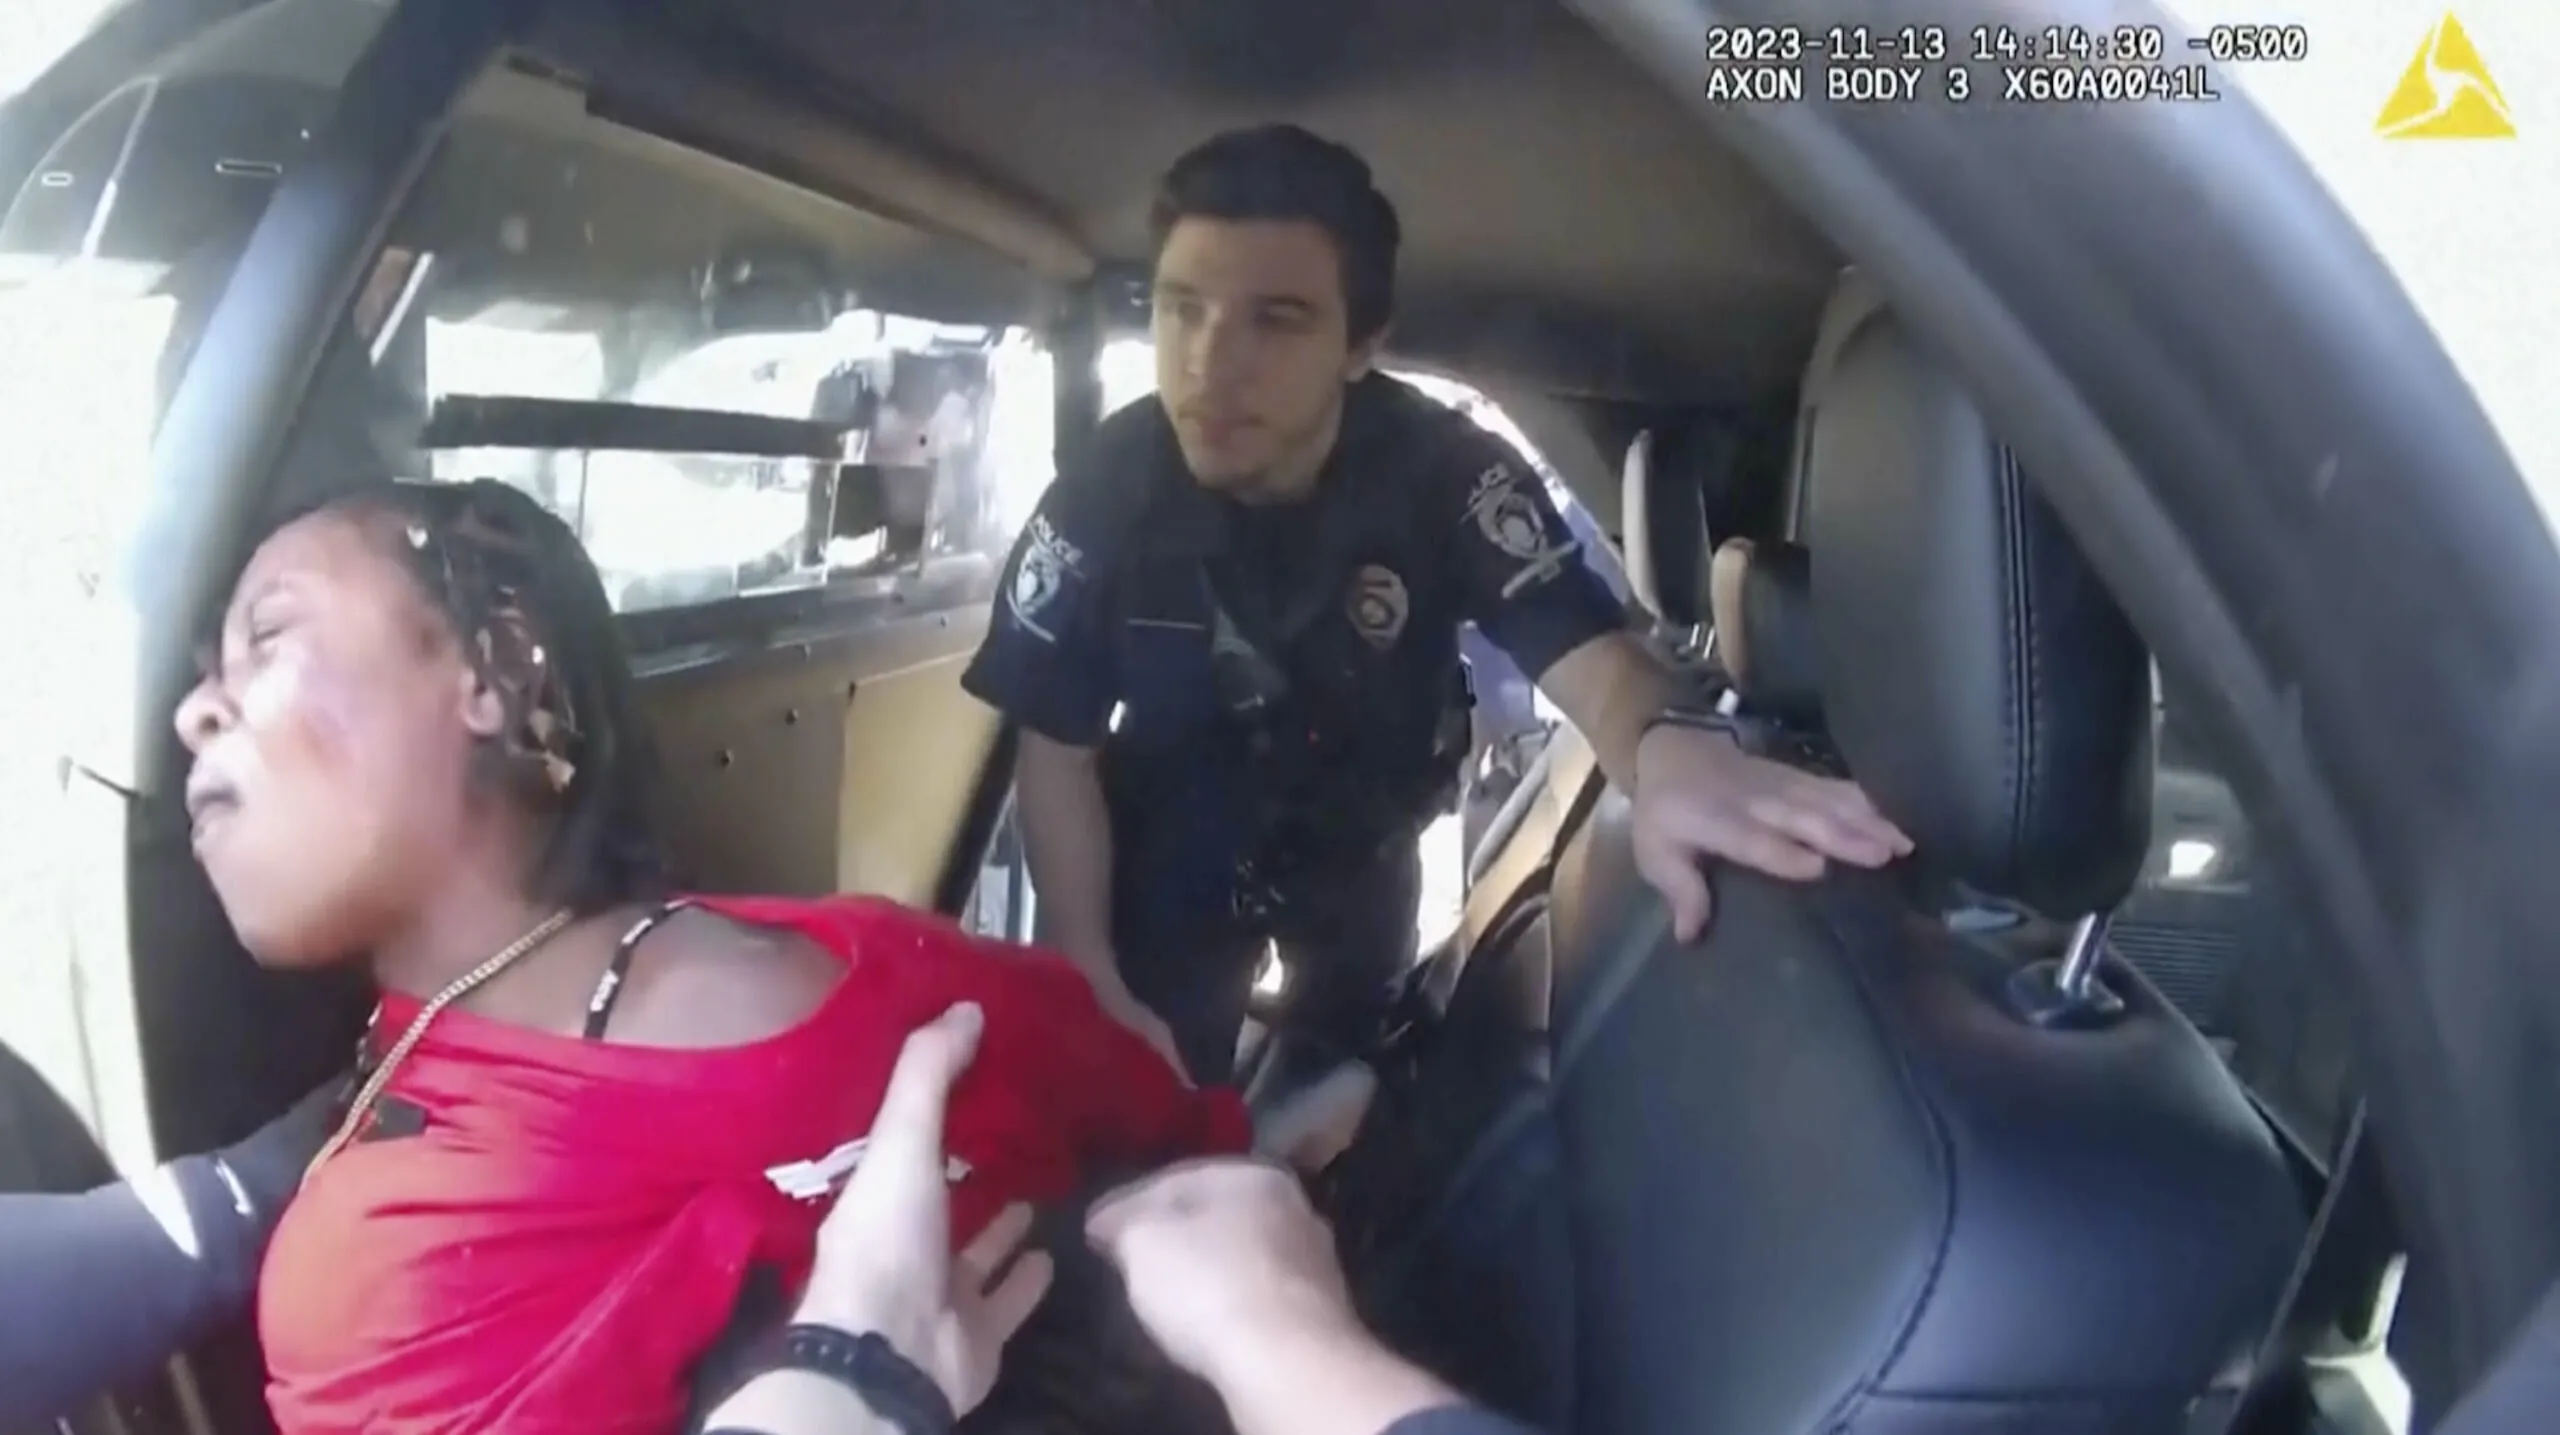 A North Carolina officer suspended for using excessive force while arresting a black woman